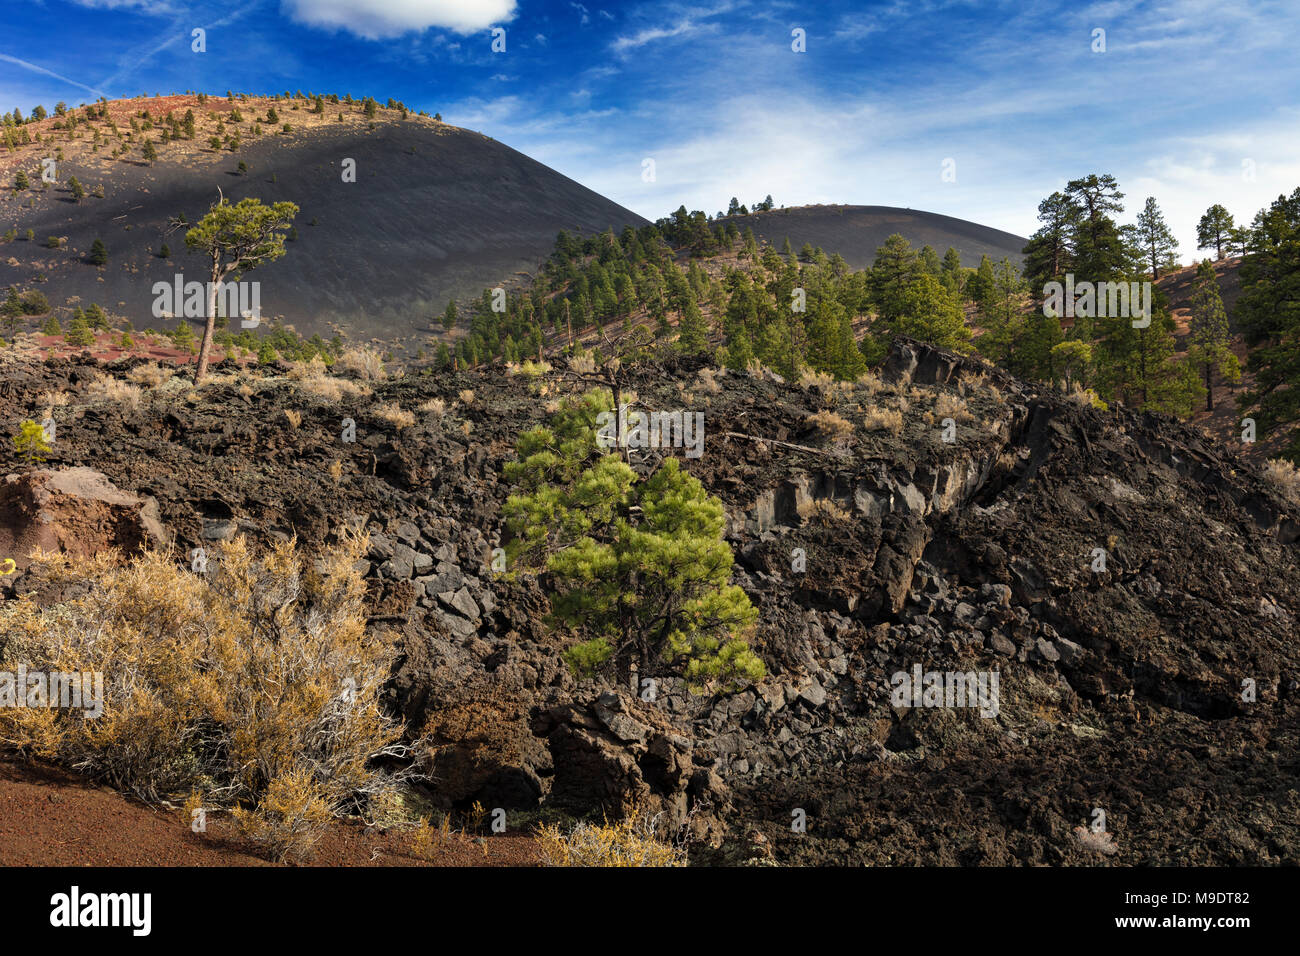 Collapsed Lava Tube & Colorful Cinder Cones, Sunset Crater National Monument, AZ Stock Photo